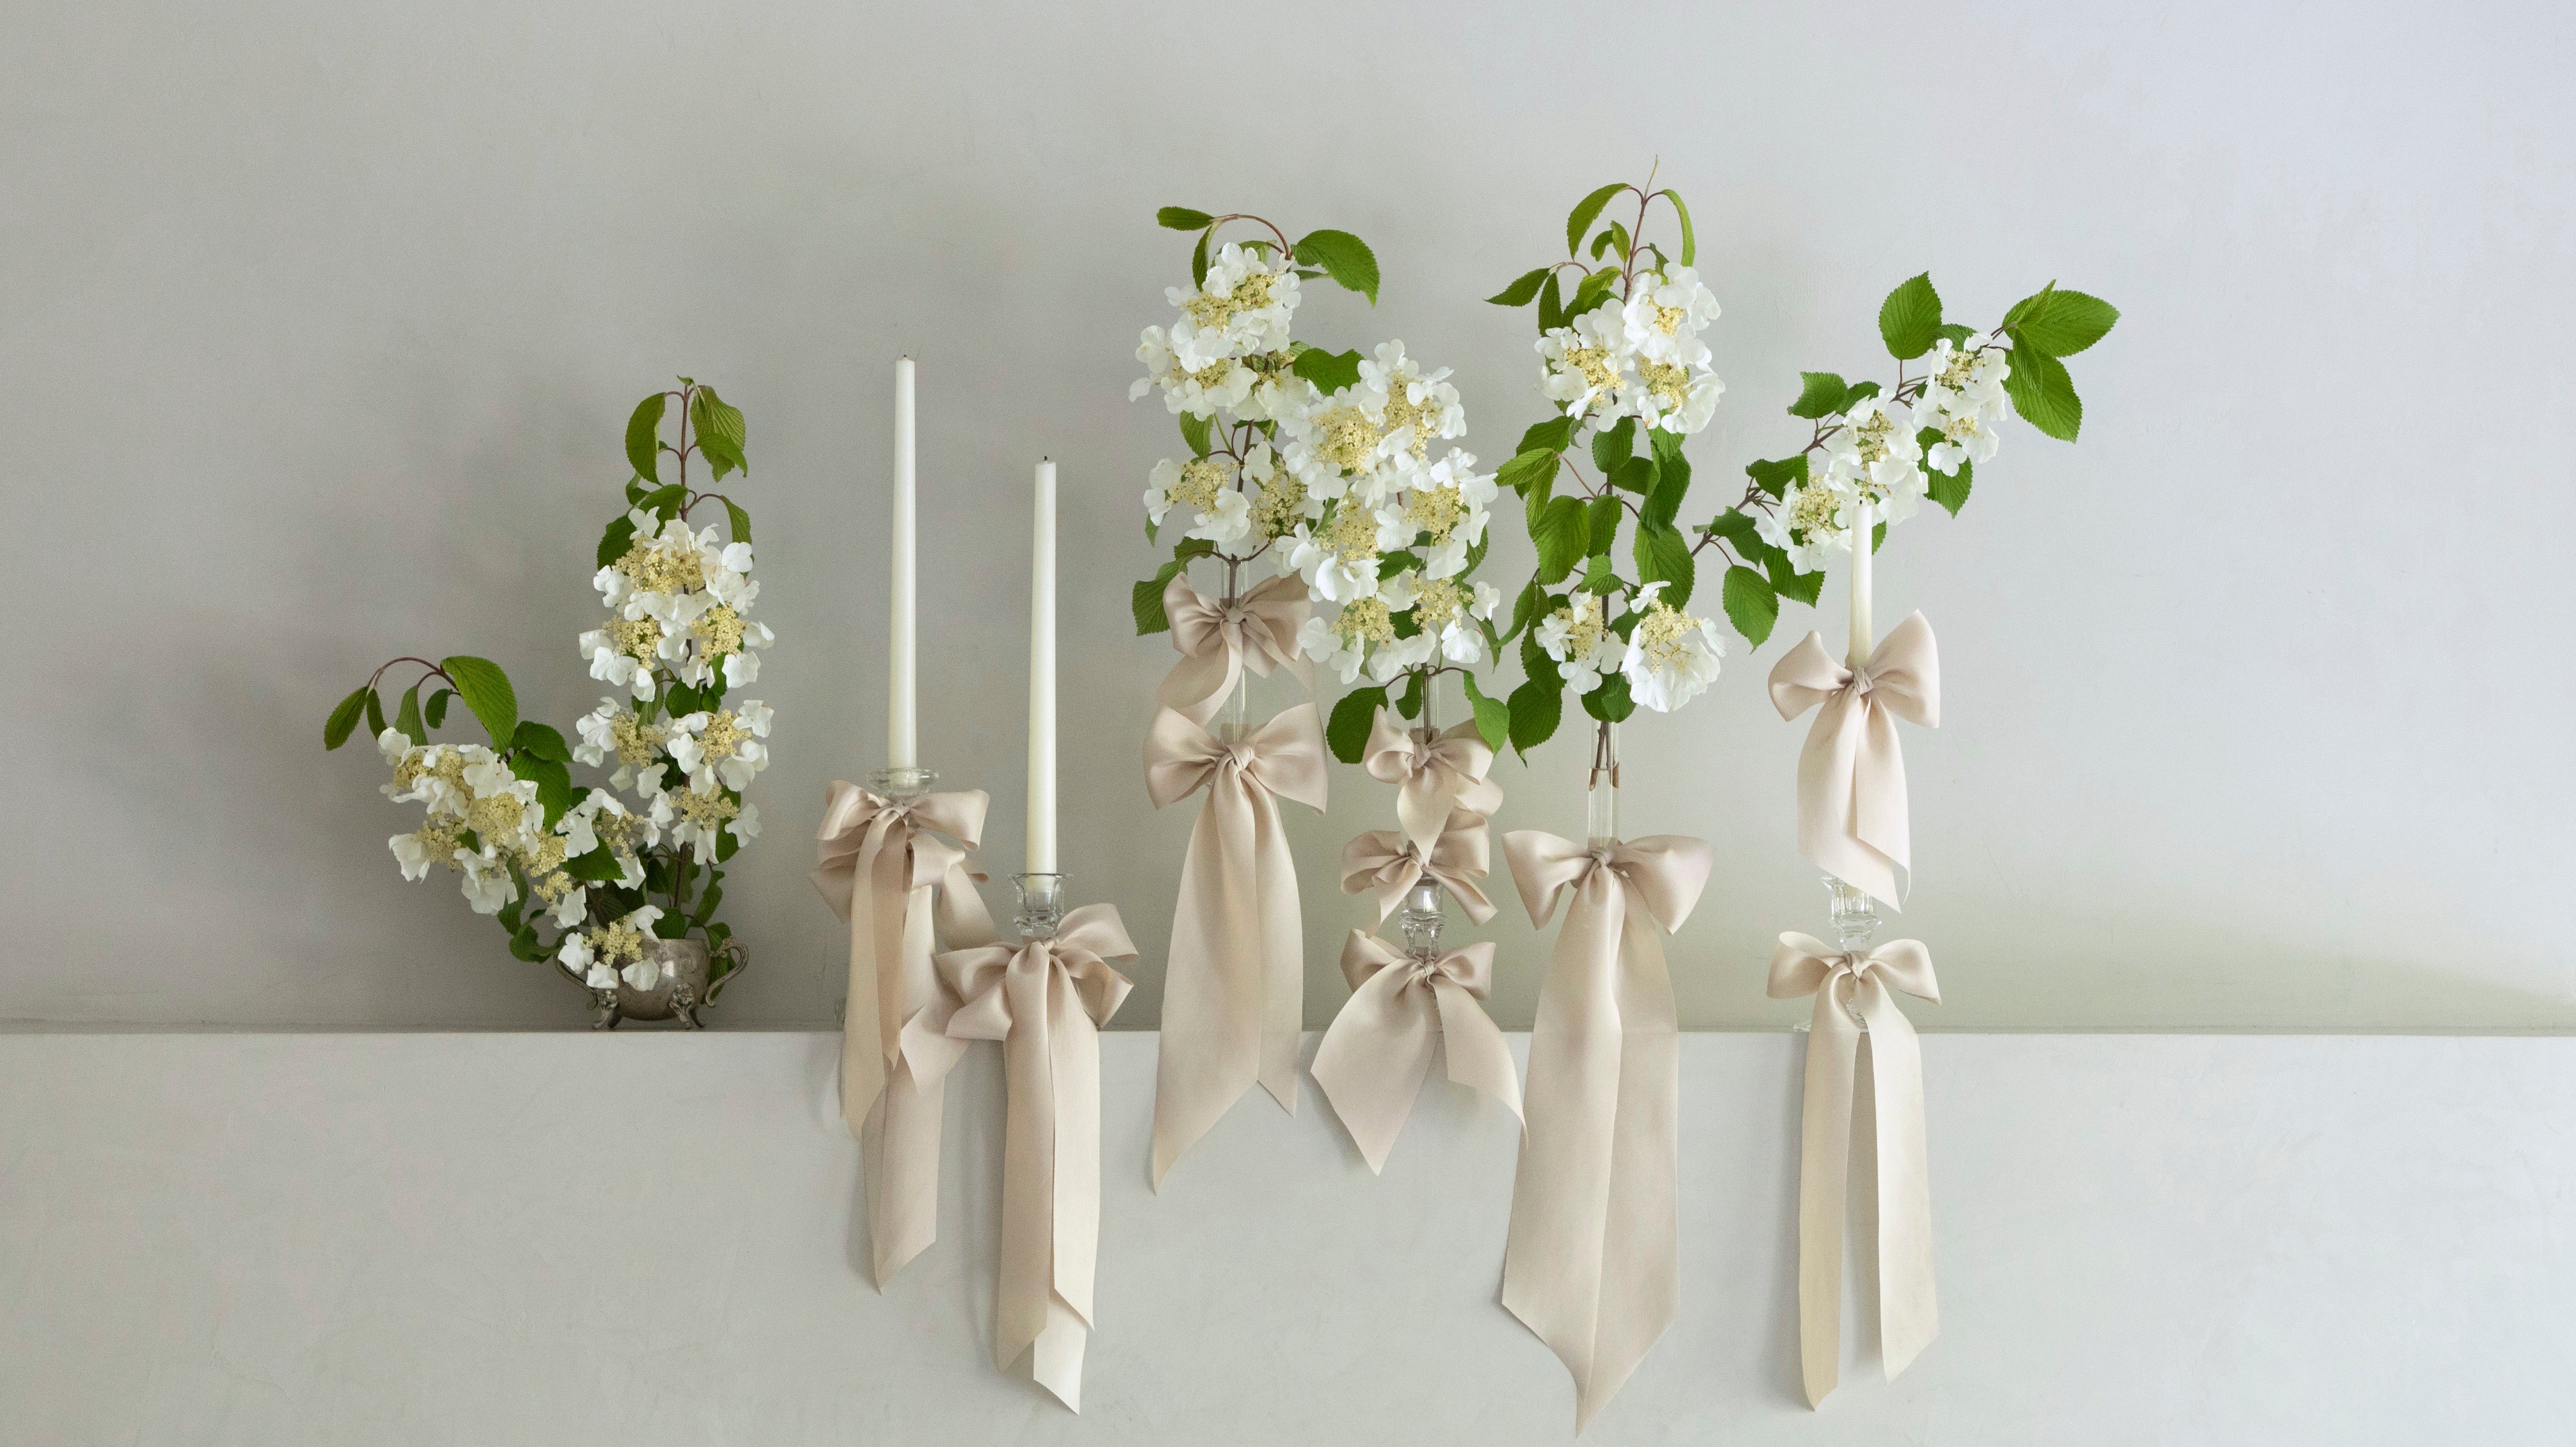 How Much Ribbon Do I Need to Make a Bow? A Ribbon Display Guide for Stylists, Wedding Planners, and Florists